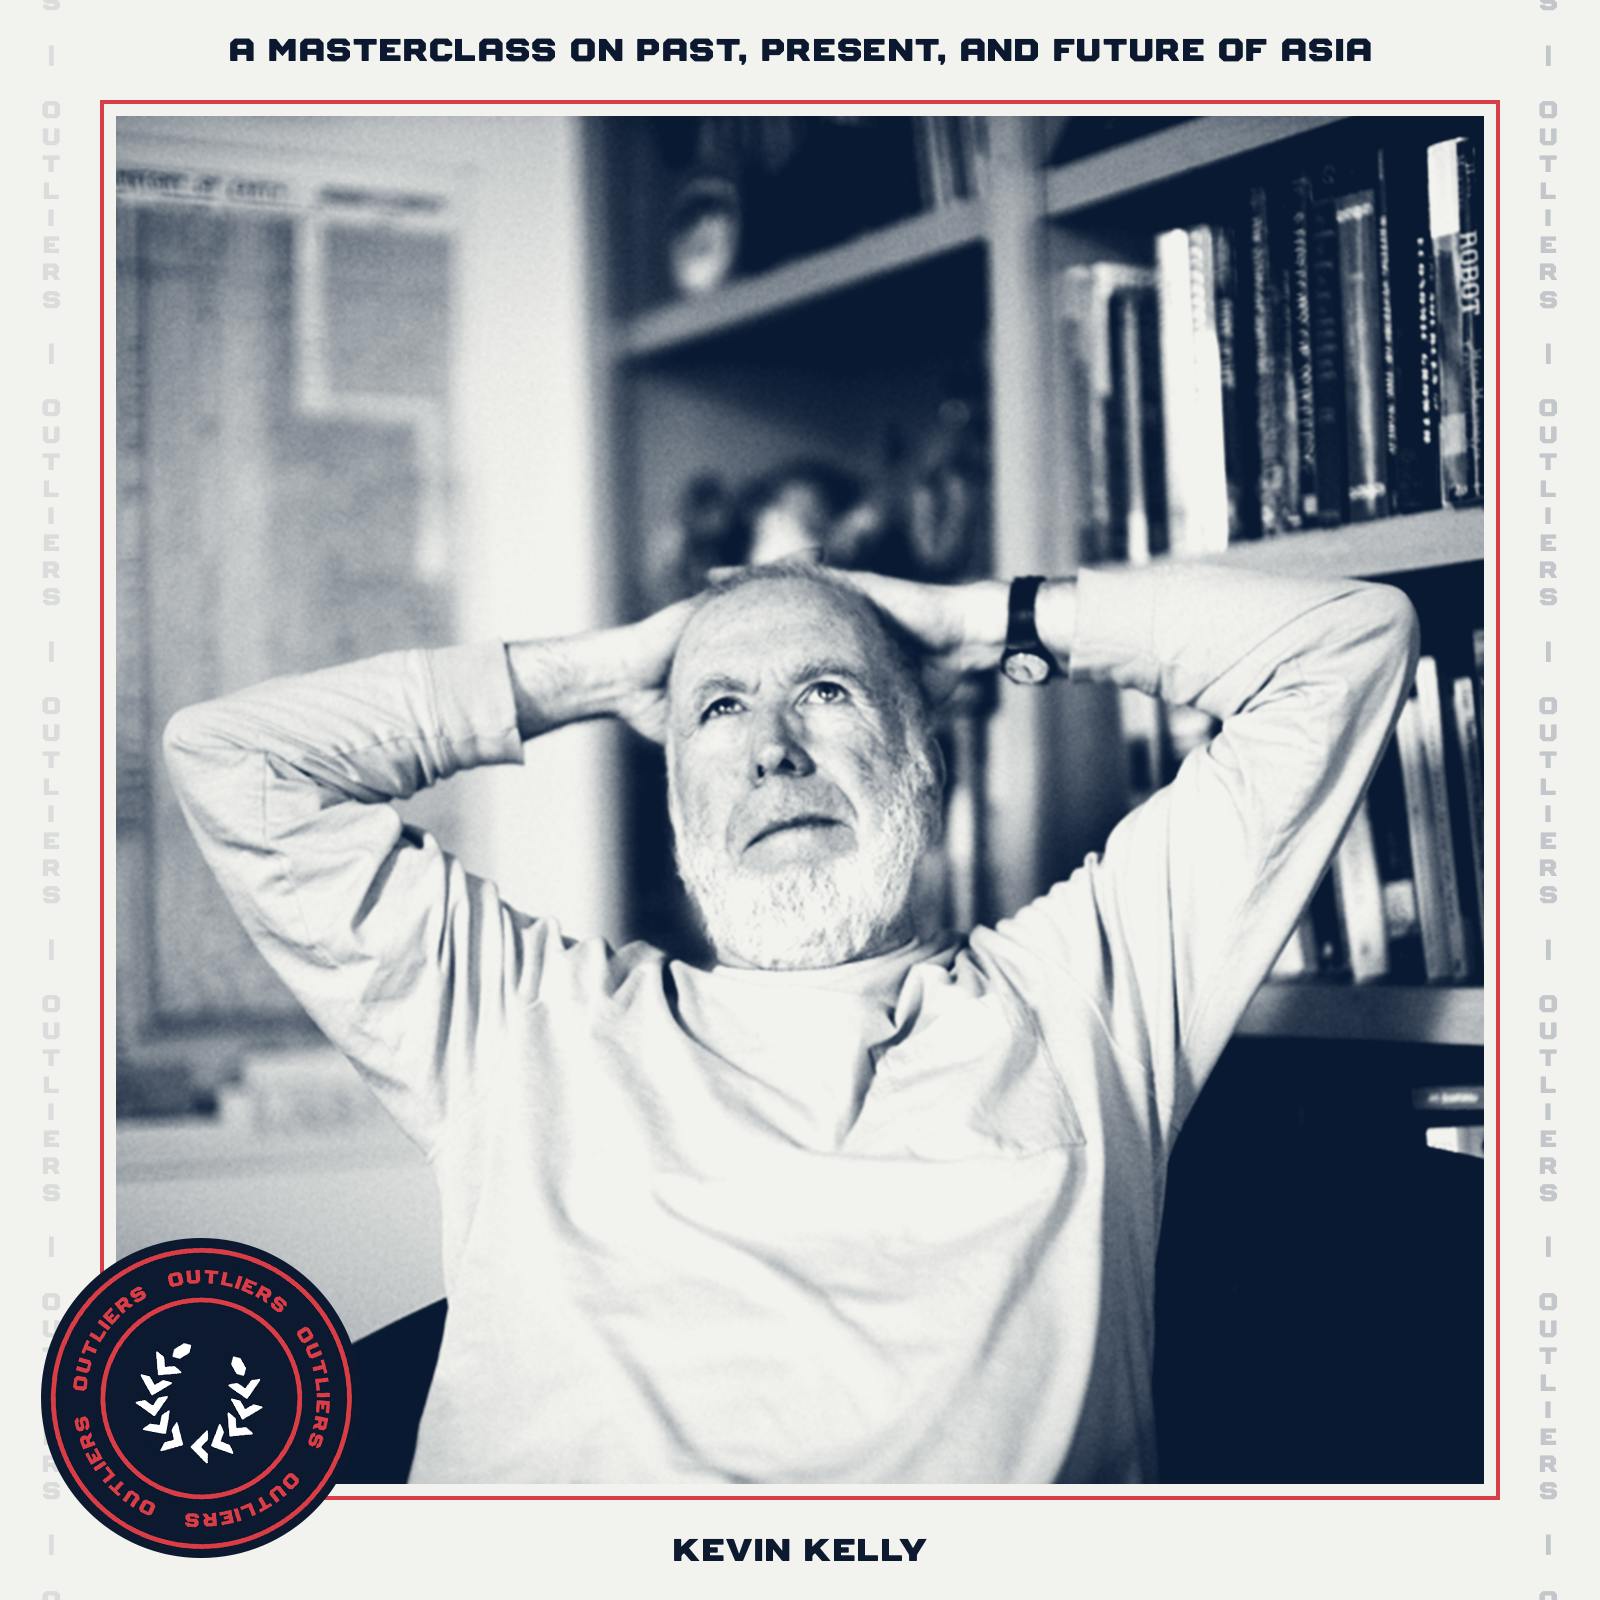 All-Time Top 10 Guests – #10 Kevin Kelly (Vanishing Asia: A Masterclass on the Past, Present, and Future of Asia)